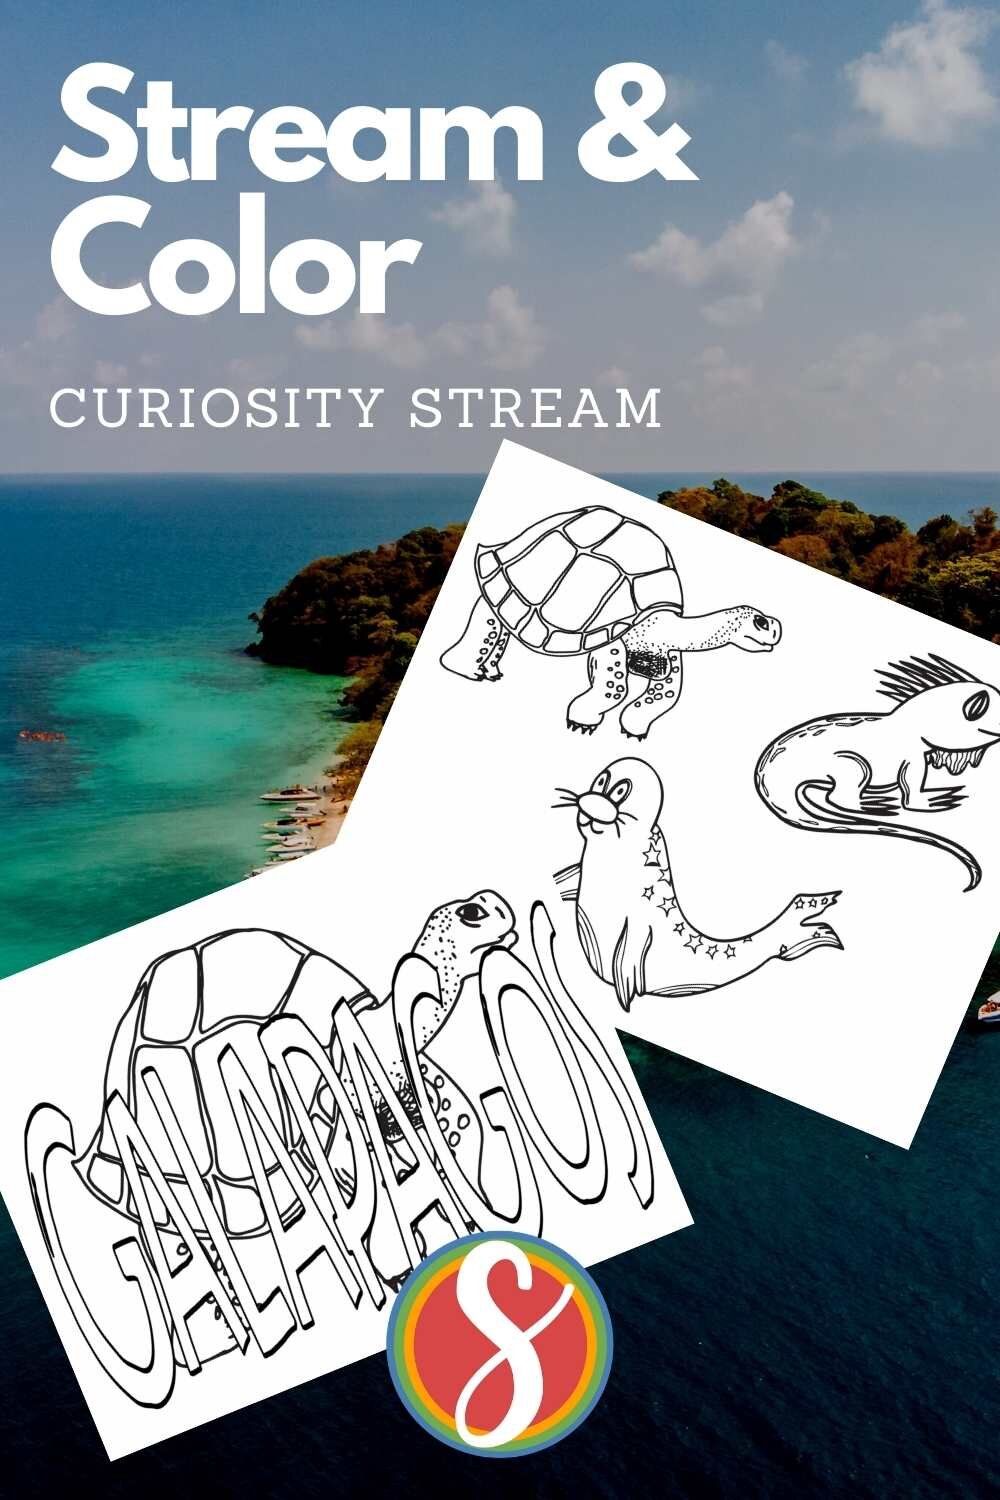 Watch Wild Galapagos on Curiosity Stream and color these fun pages I made inspired by the show! The pages are totally free to print and color - print them out for your whole class!